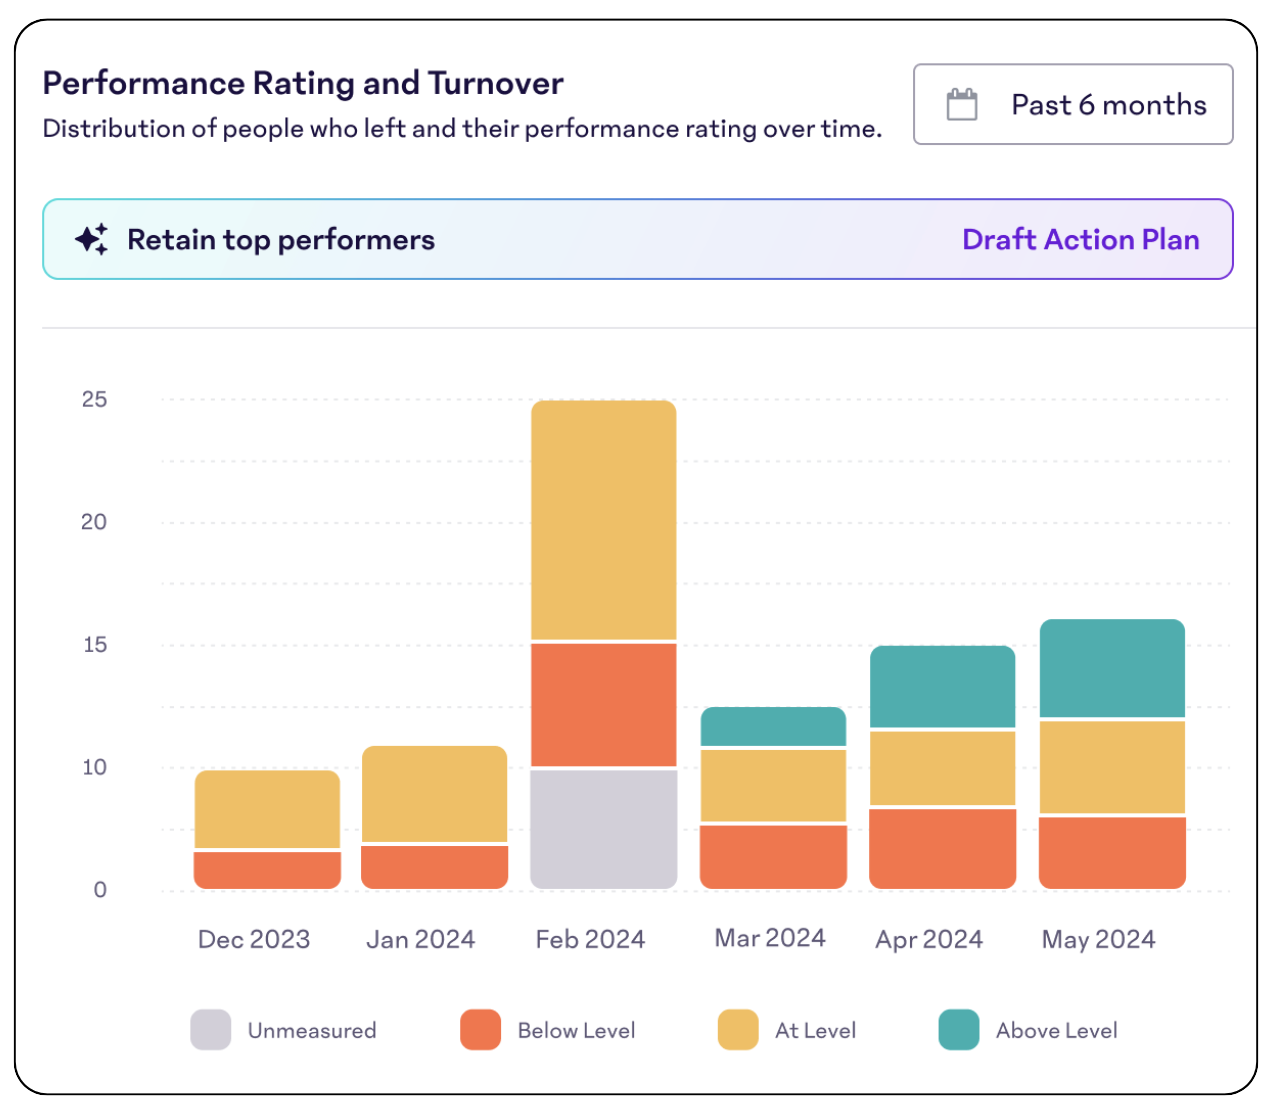 Perform-Turnover-Visualization.png